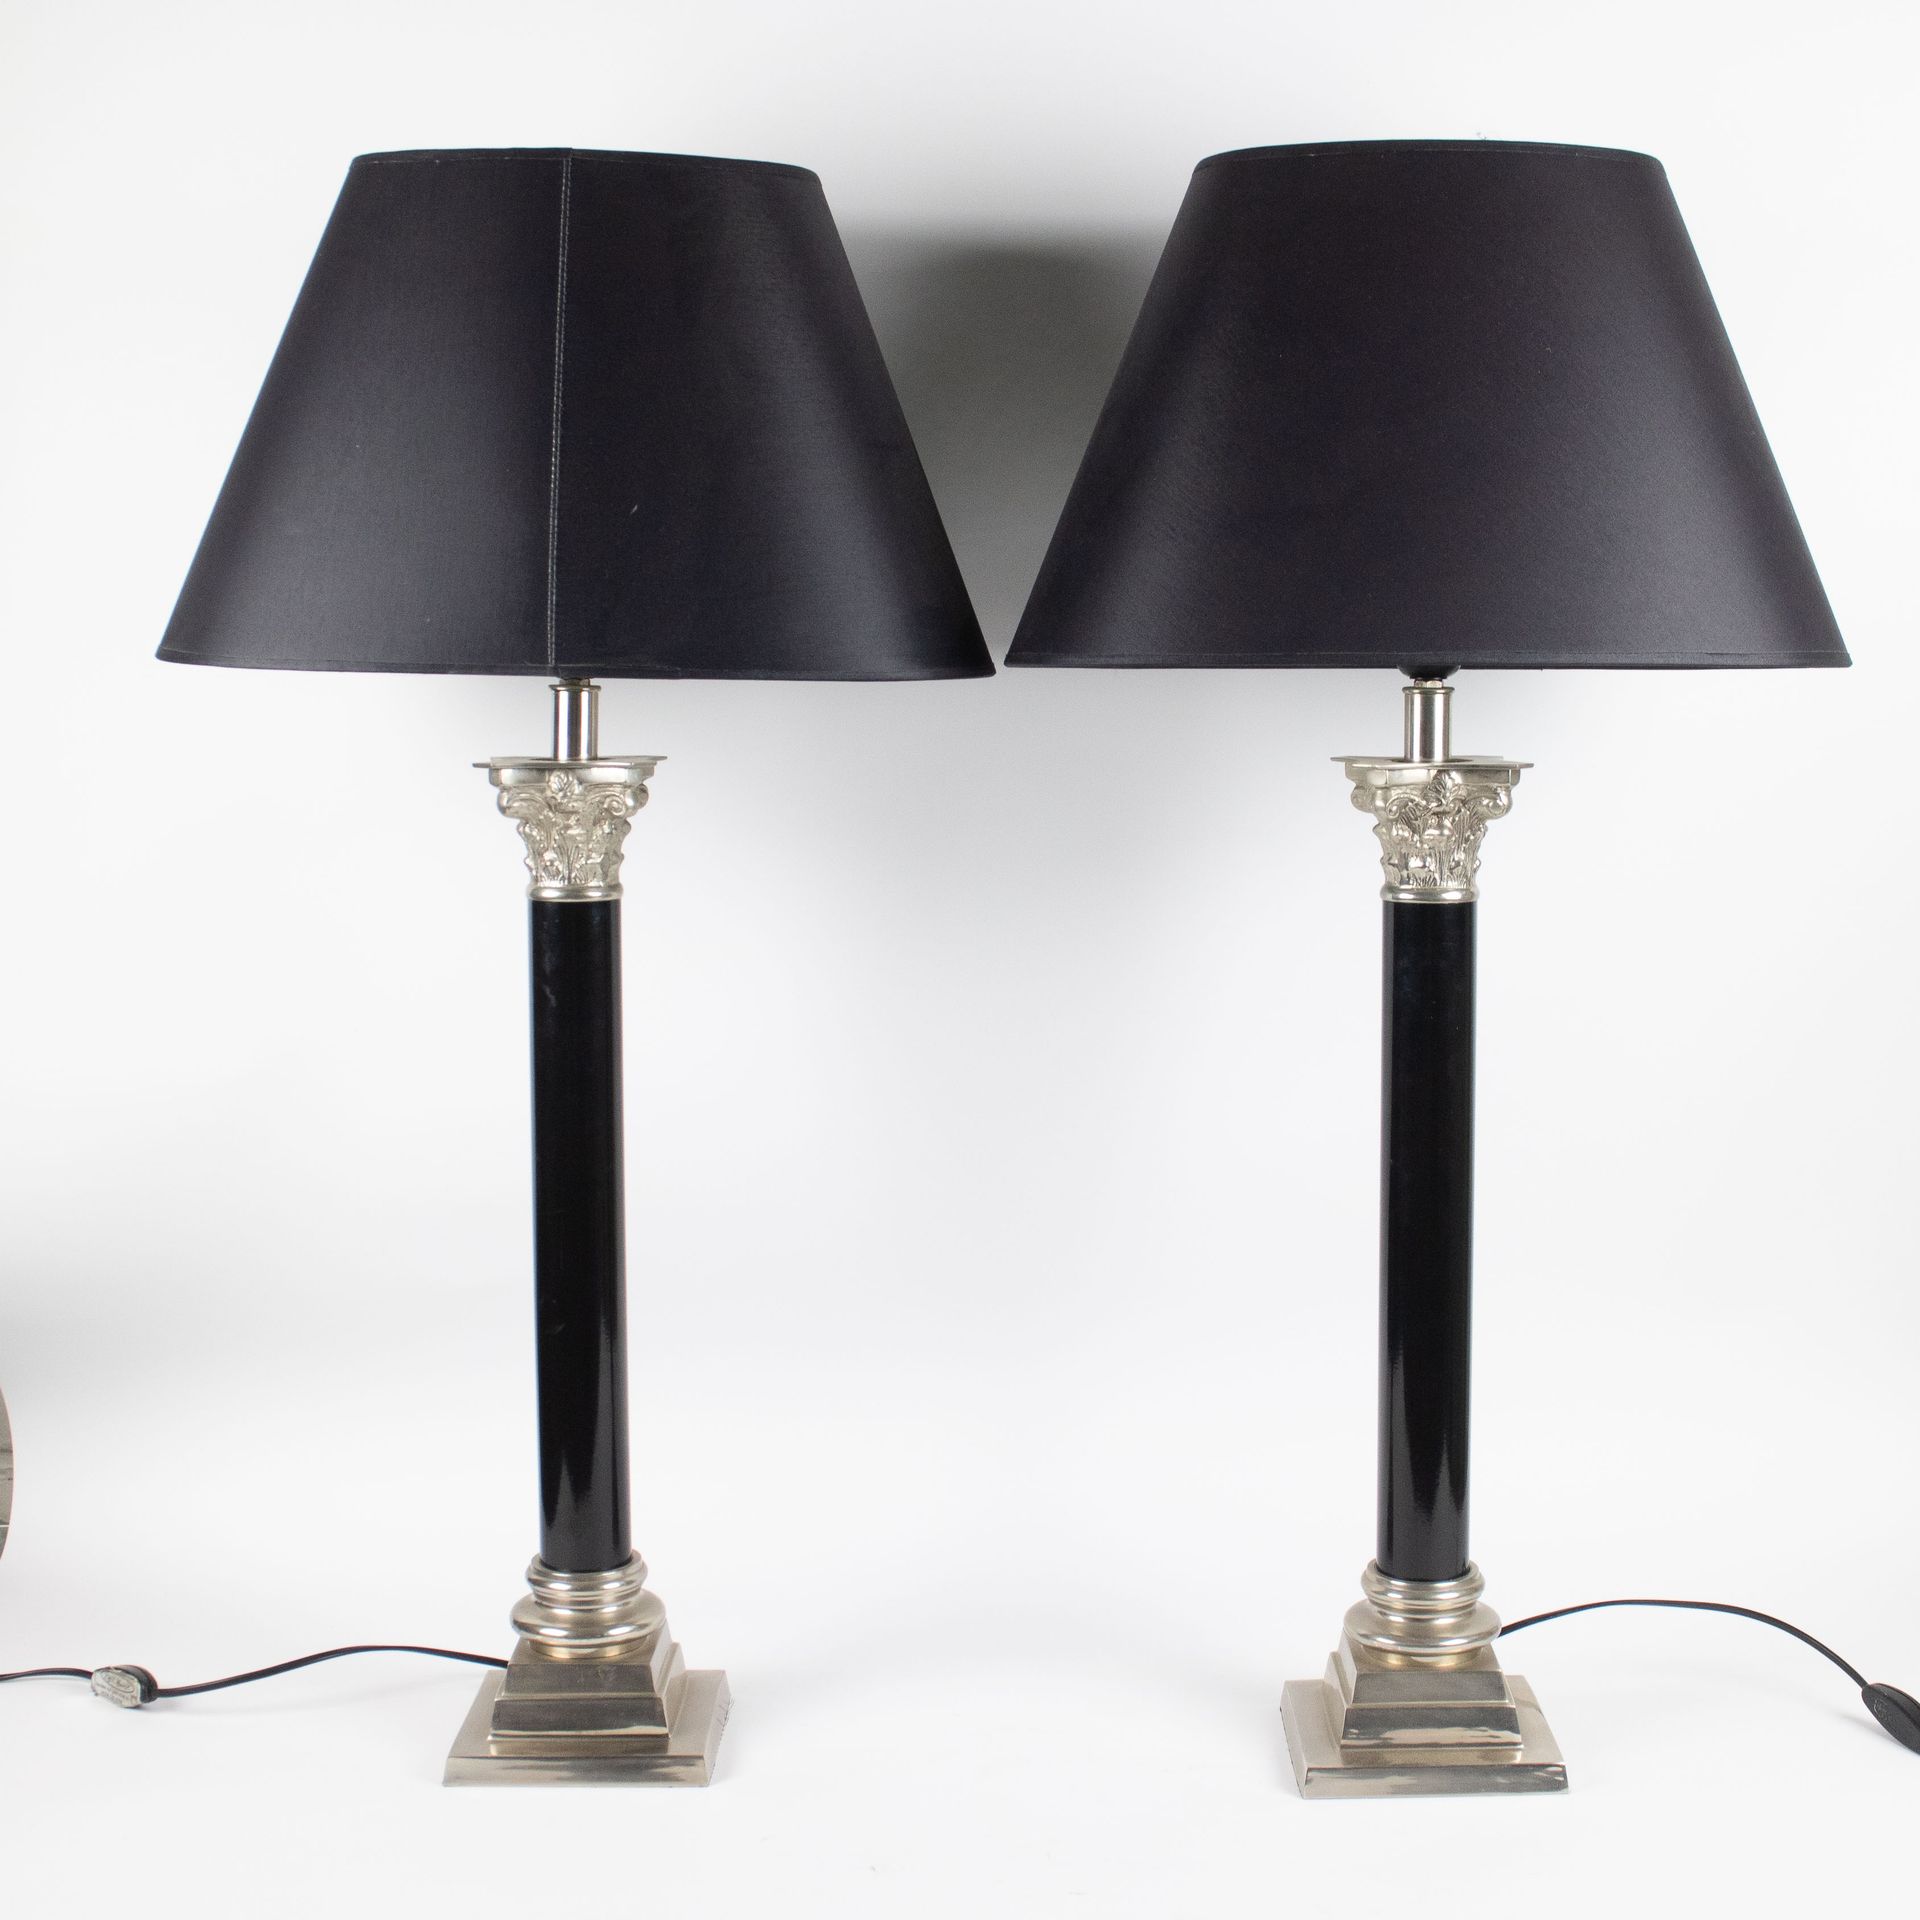 Pair of lamps style Empire 帝国风格的一盏灯。
高86厘米